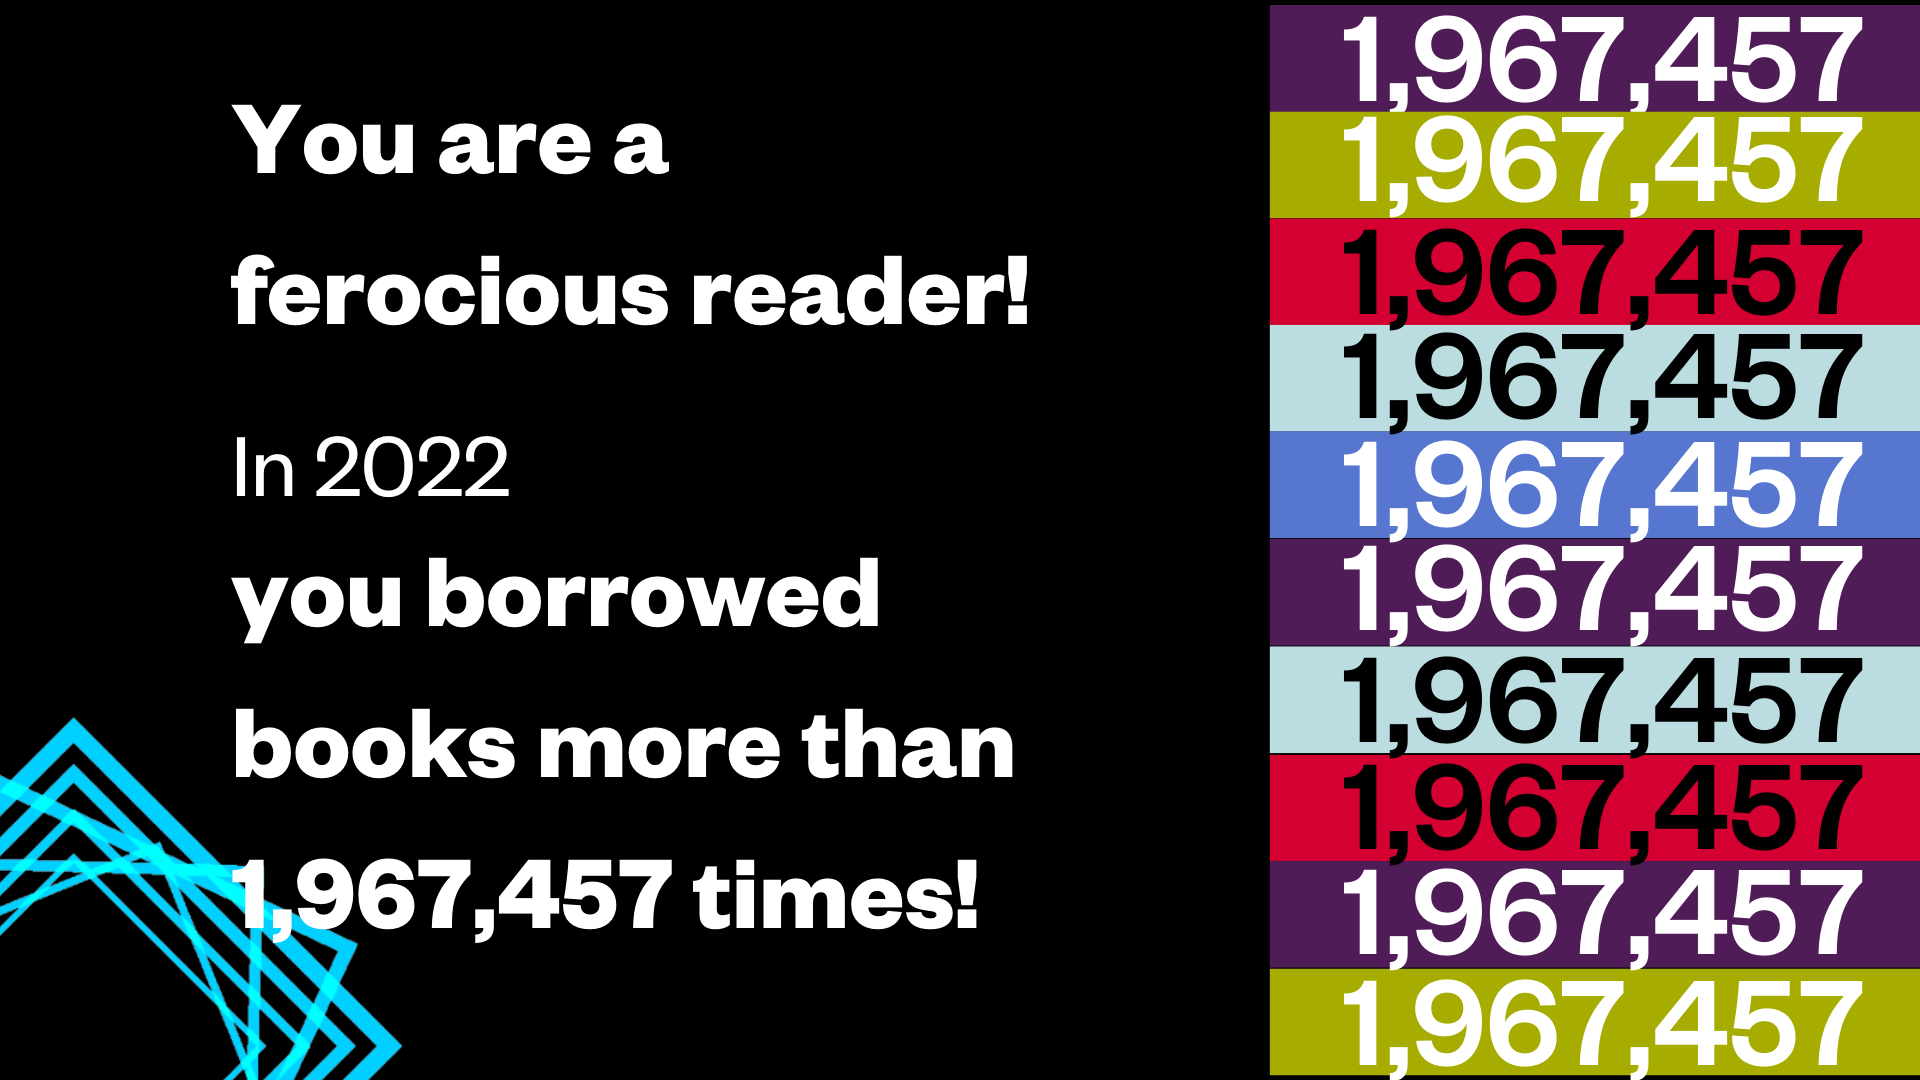 A black background with white text that reads, "You are a ferocious reader! In 2022, you borrowed books more than 1,967,457 times!